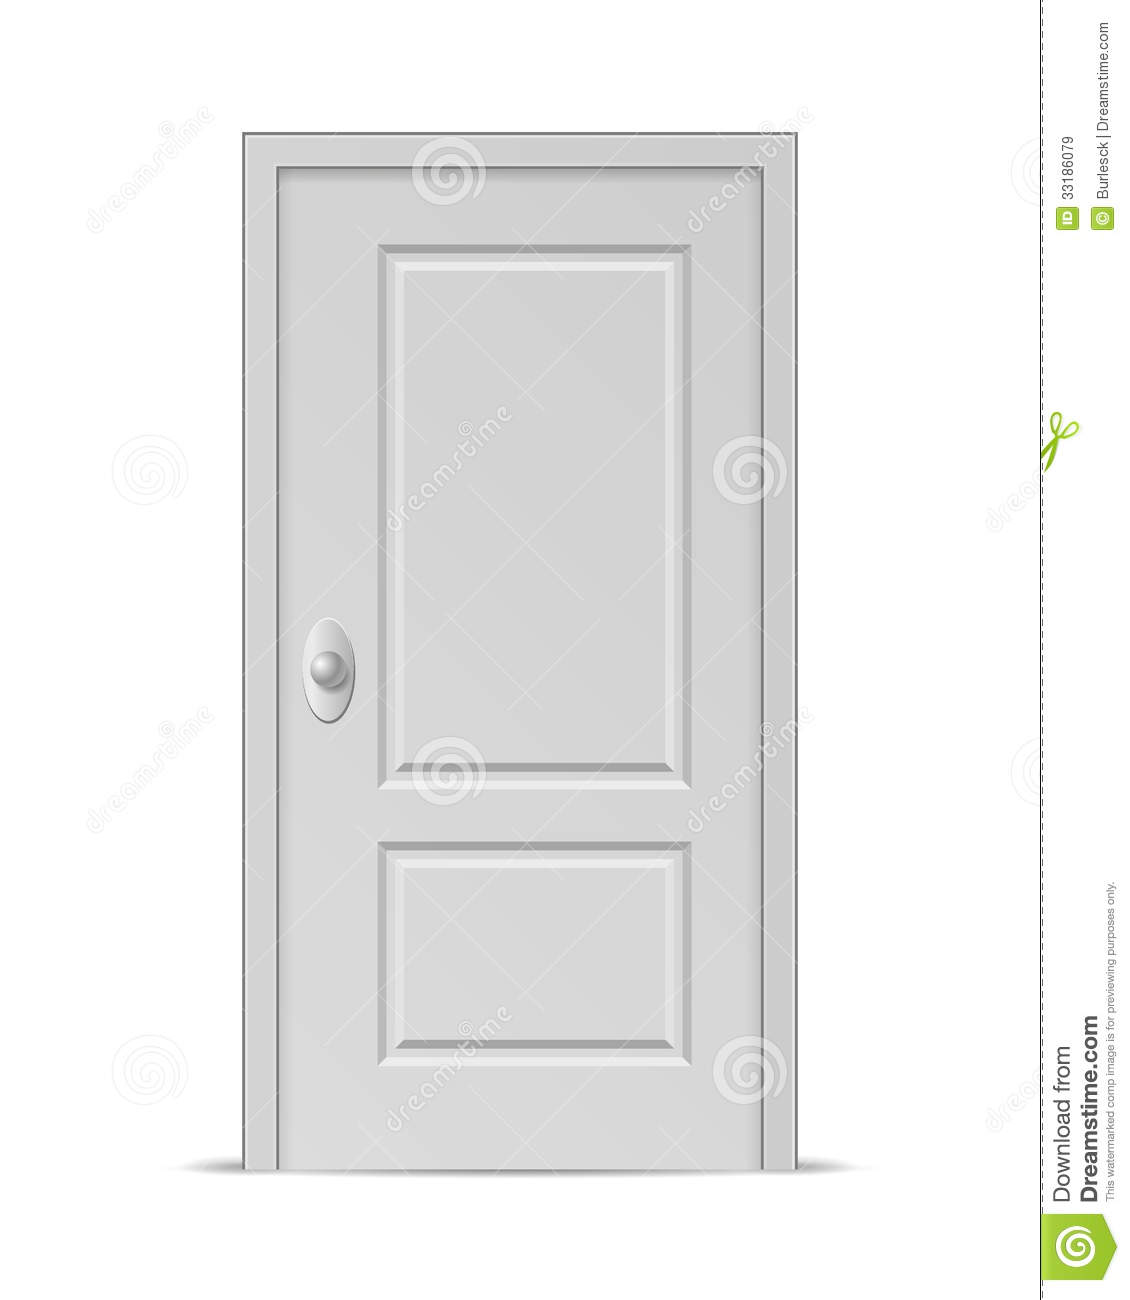 closed-door-vector-isolated-white-background-33186079